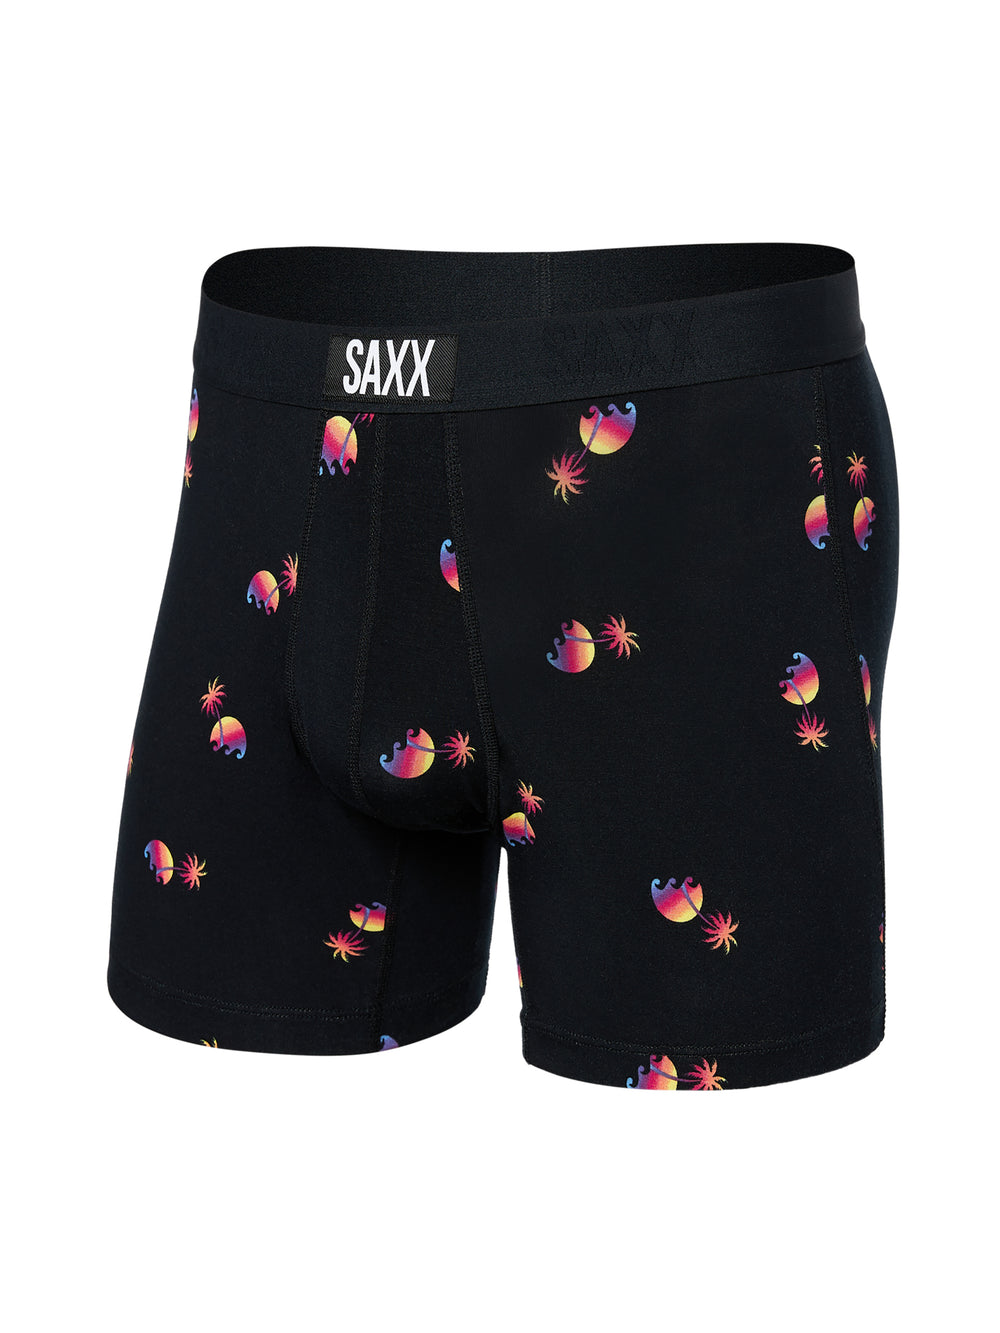 SAXX VIBE BOXER BRIEF - SUNSET WAVES